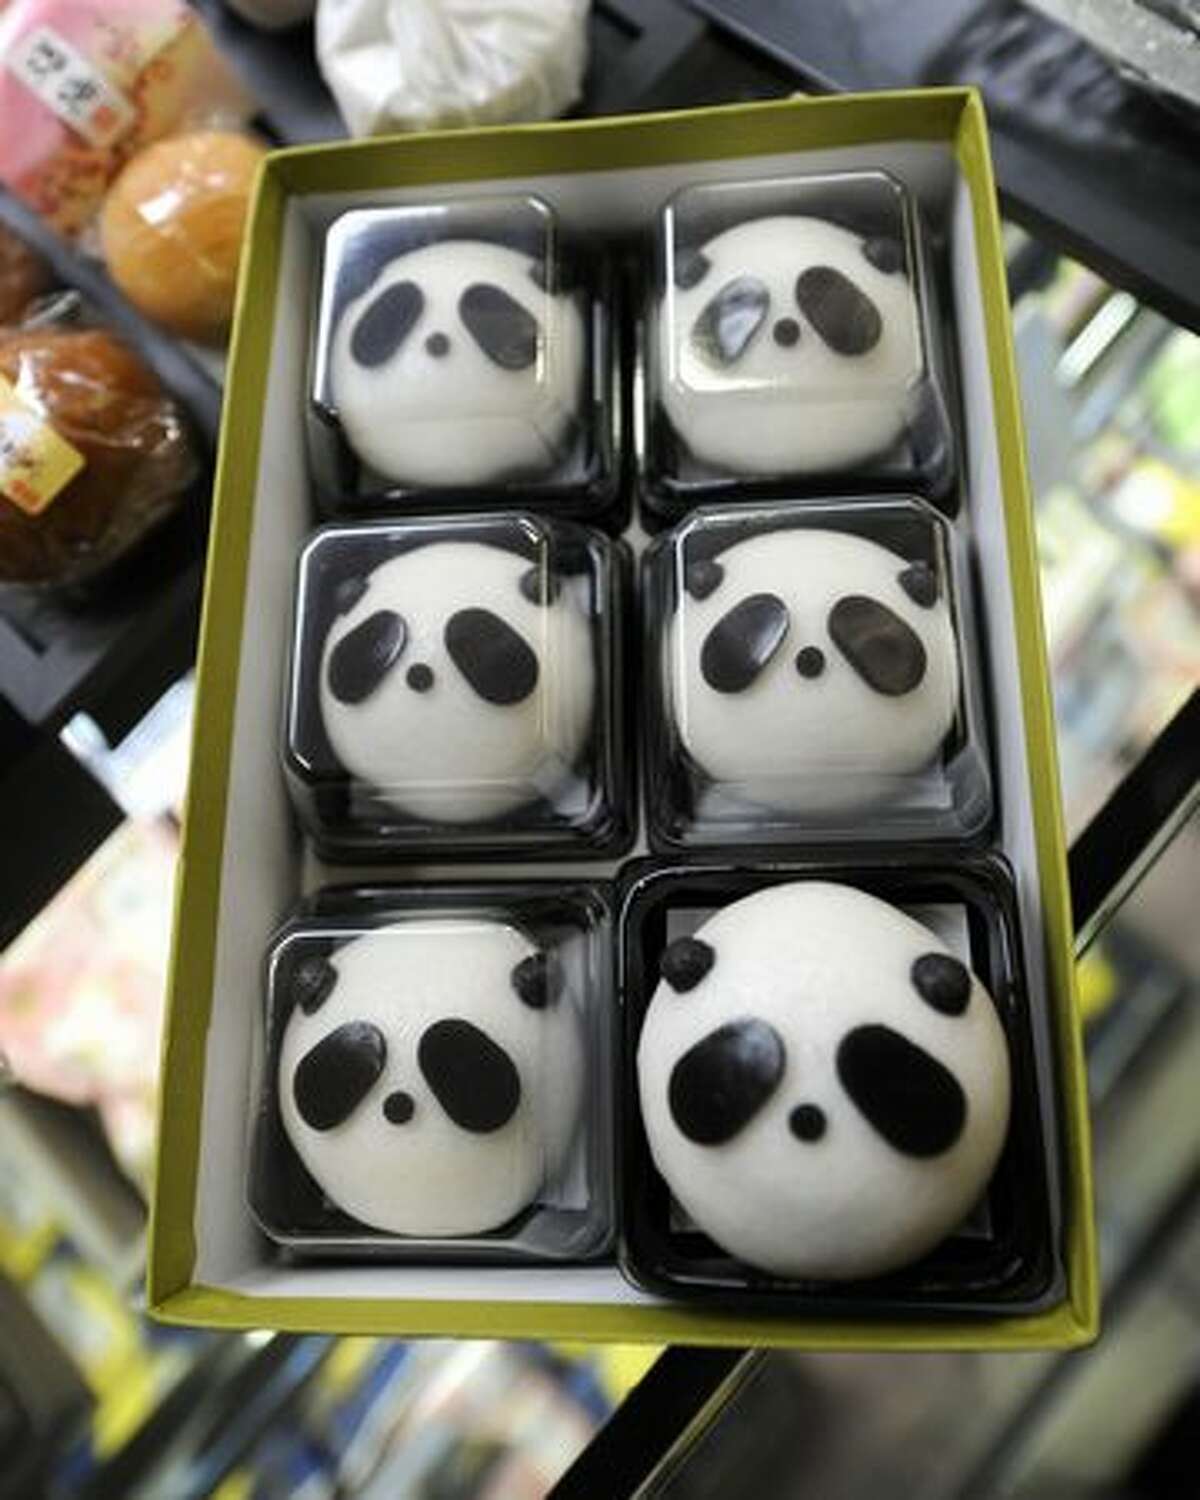 Panda-shaped manju, buns stuffed with adzuki-bean paste, are displayed in Tokyo on February 21, 2011. Panda fever gripped Japan as a pair of the bamboo eaters was heading in from China, with Tokyo's zoo eying a visitor boom and the government predicting smoother ties with Beijing.